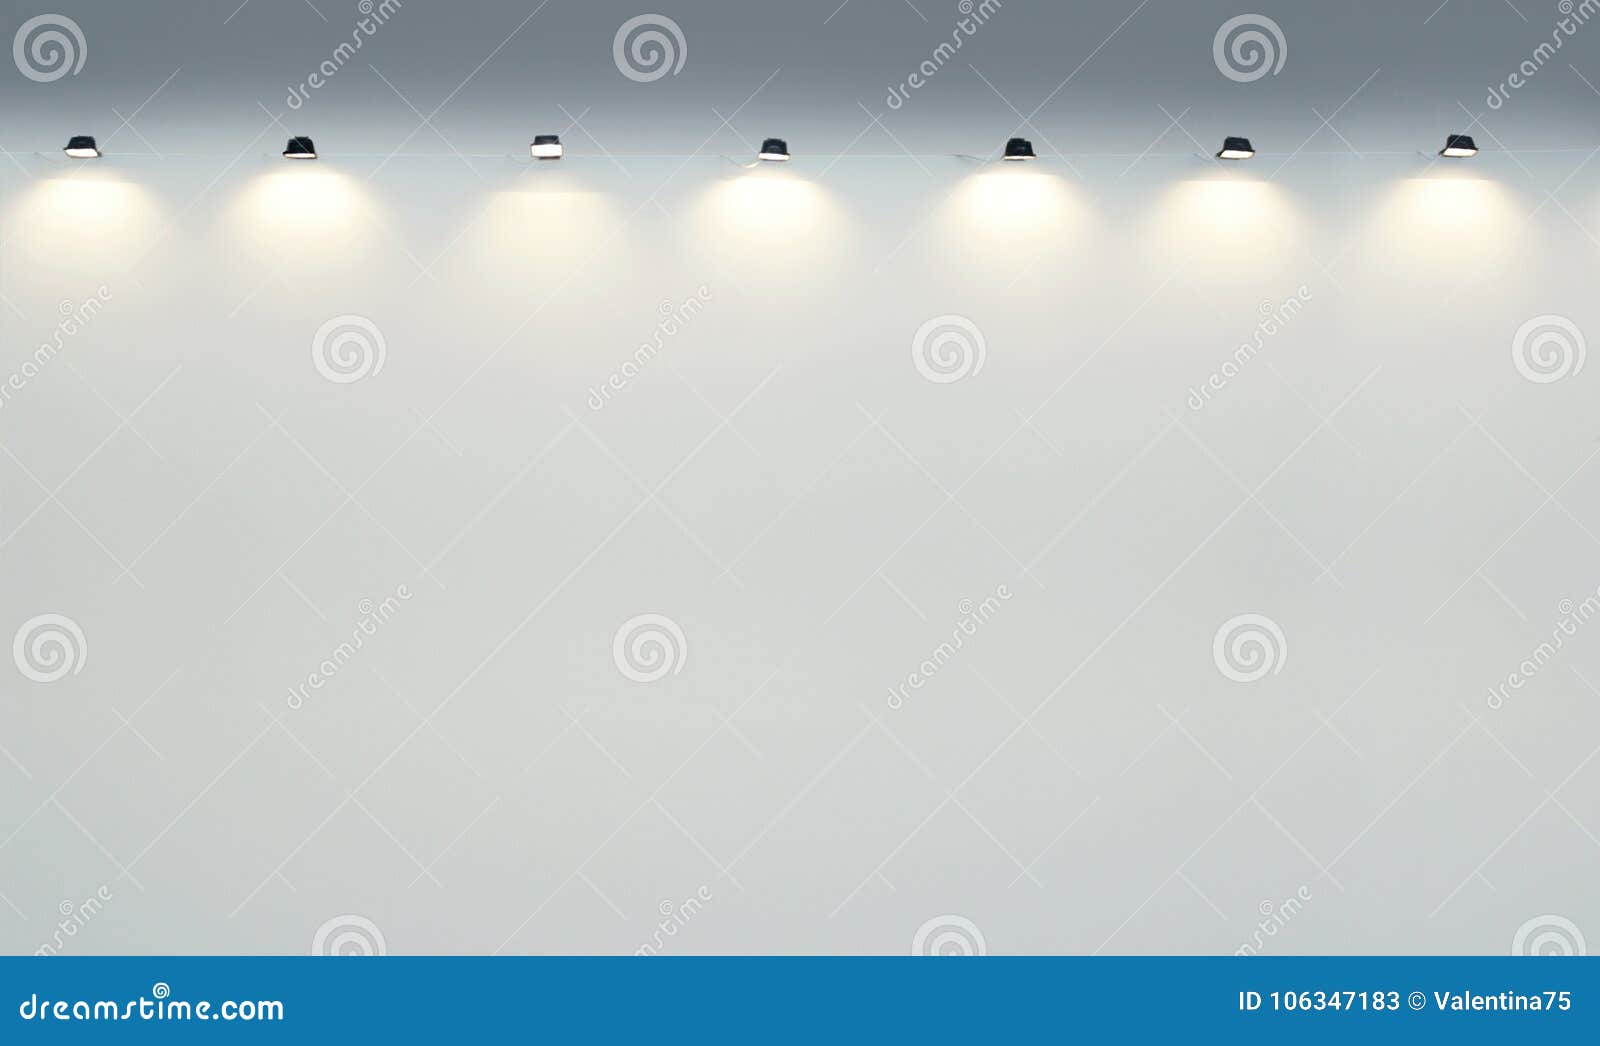 empty gallery wall with spotlights